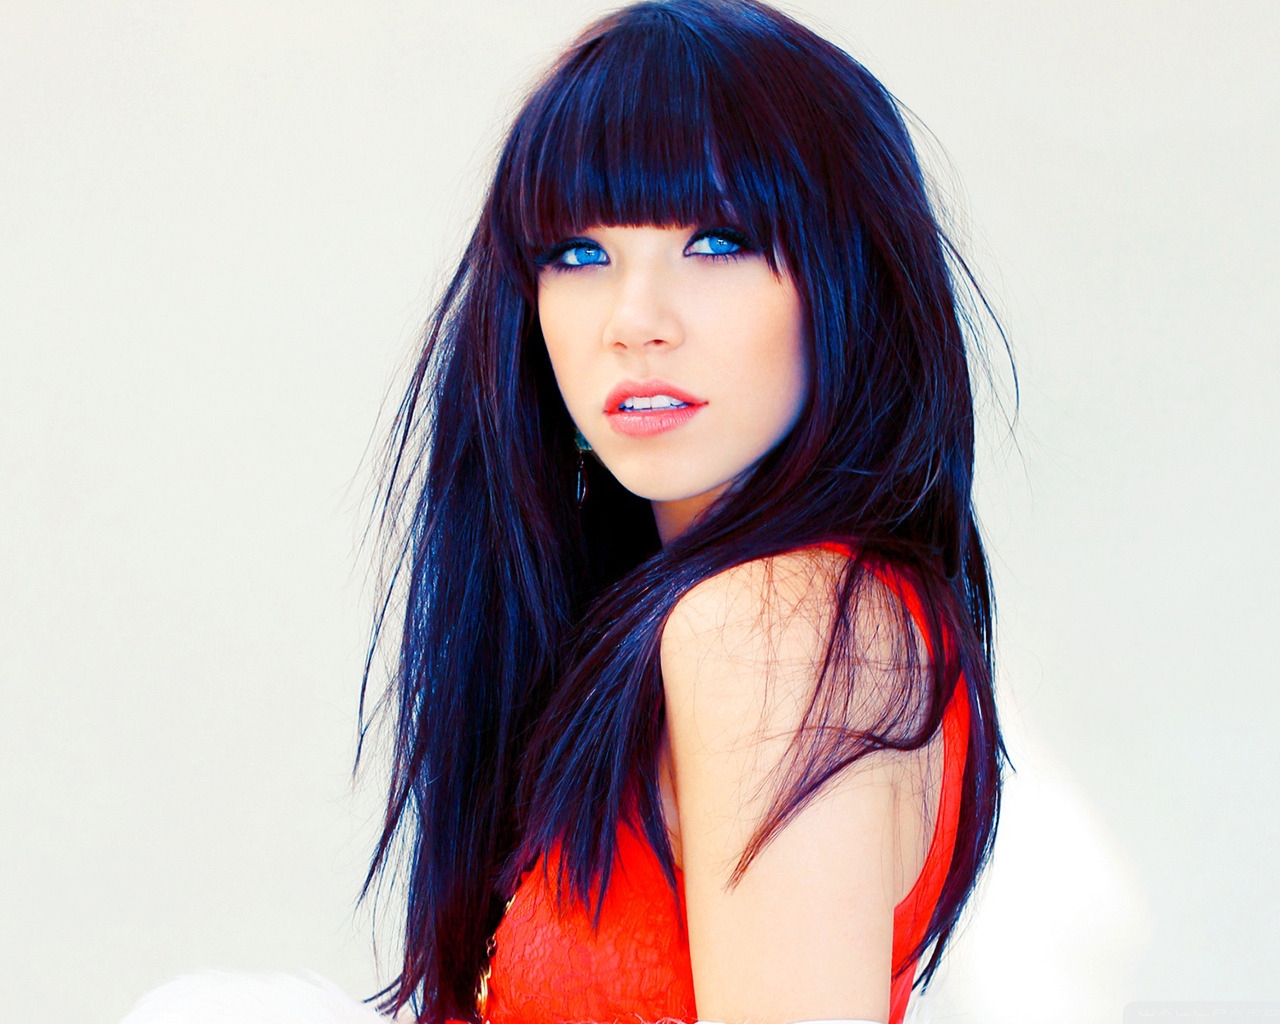 Carly Rae Jepsen Superb for 1280 x 1024 resolution